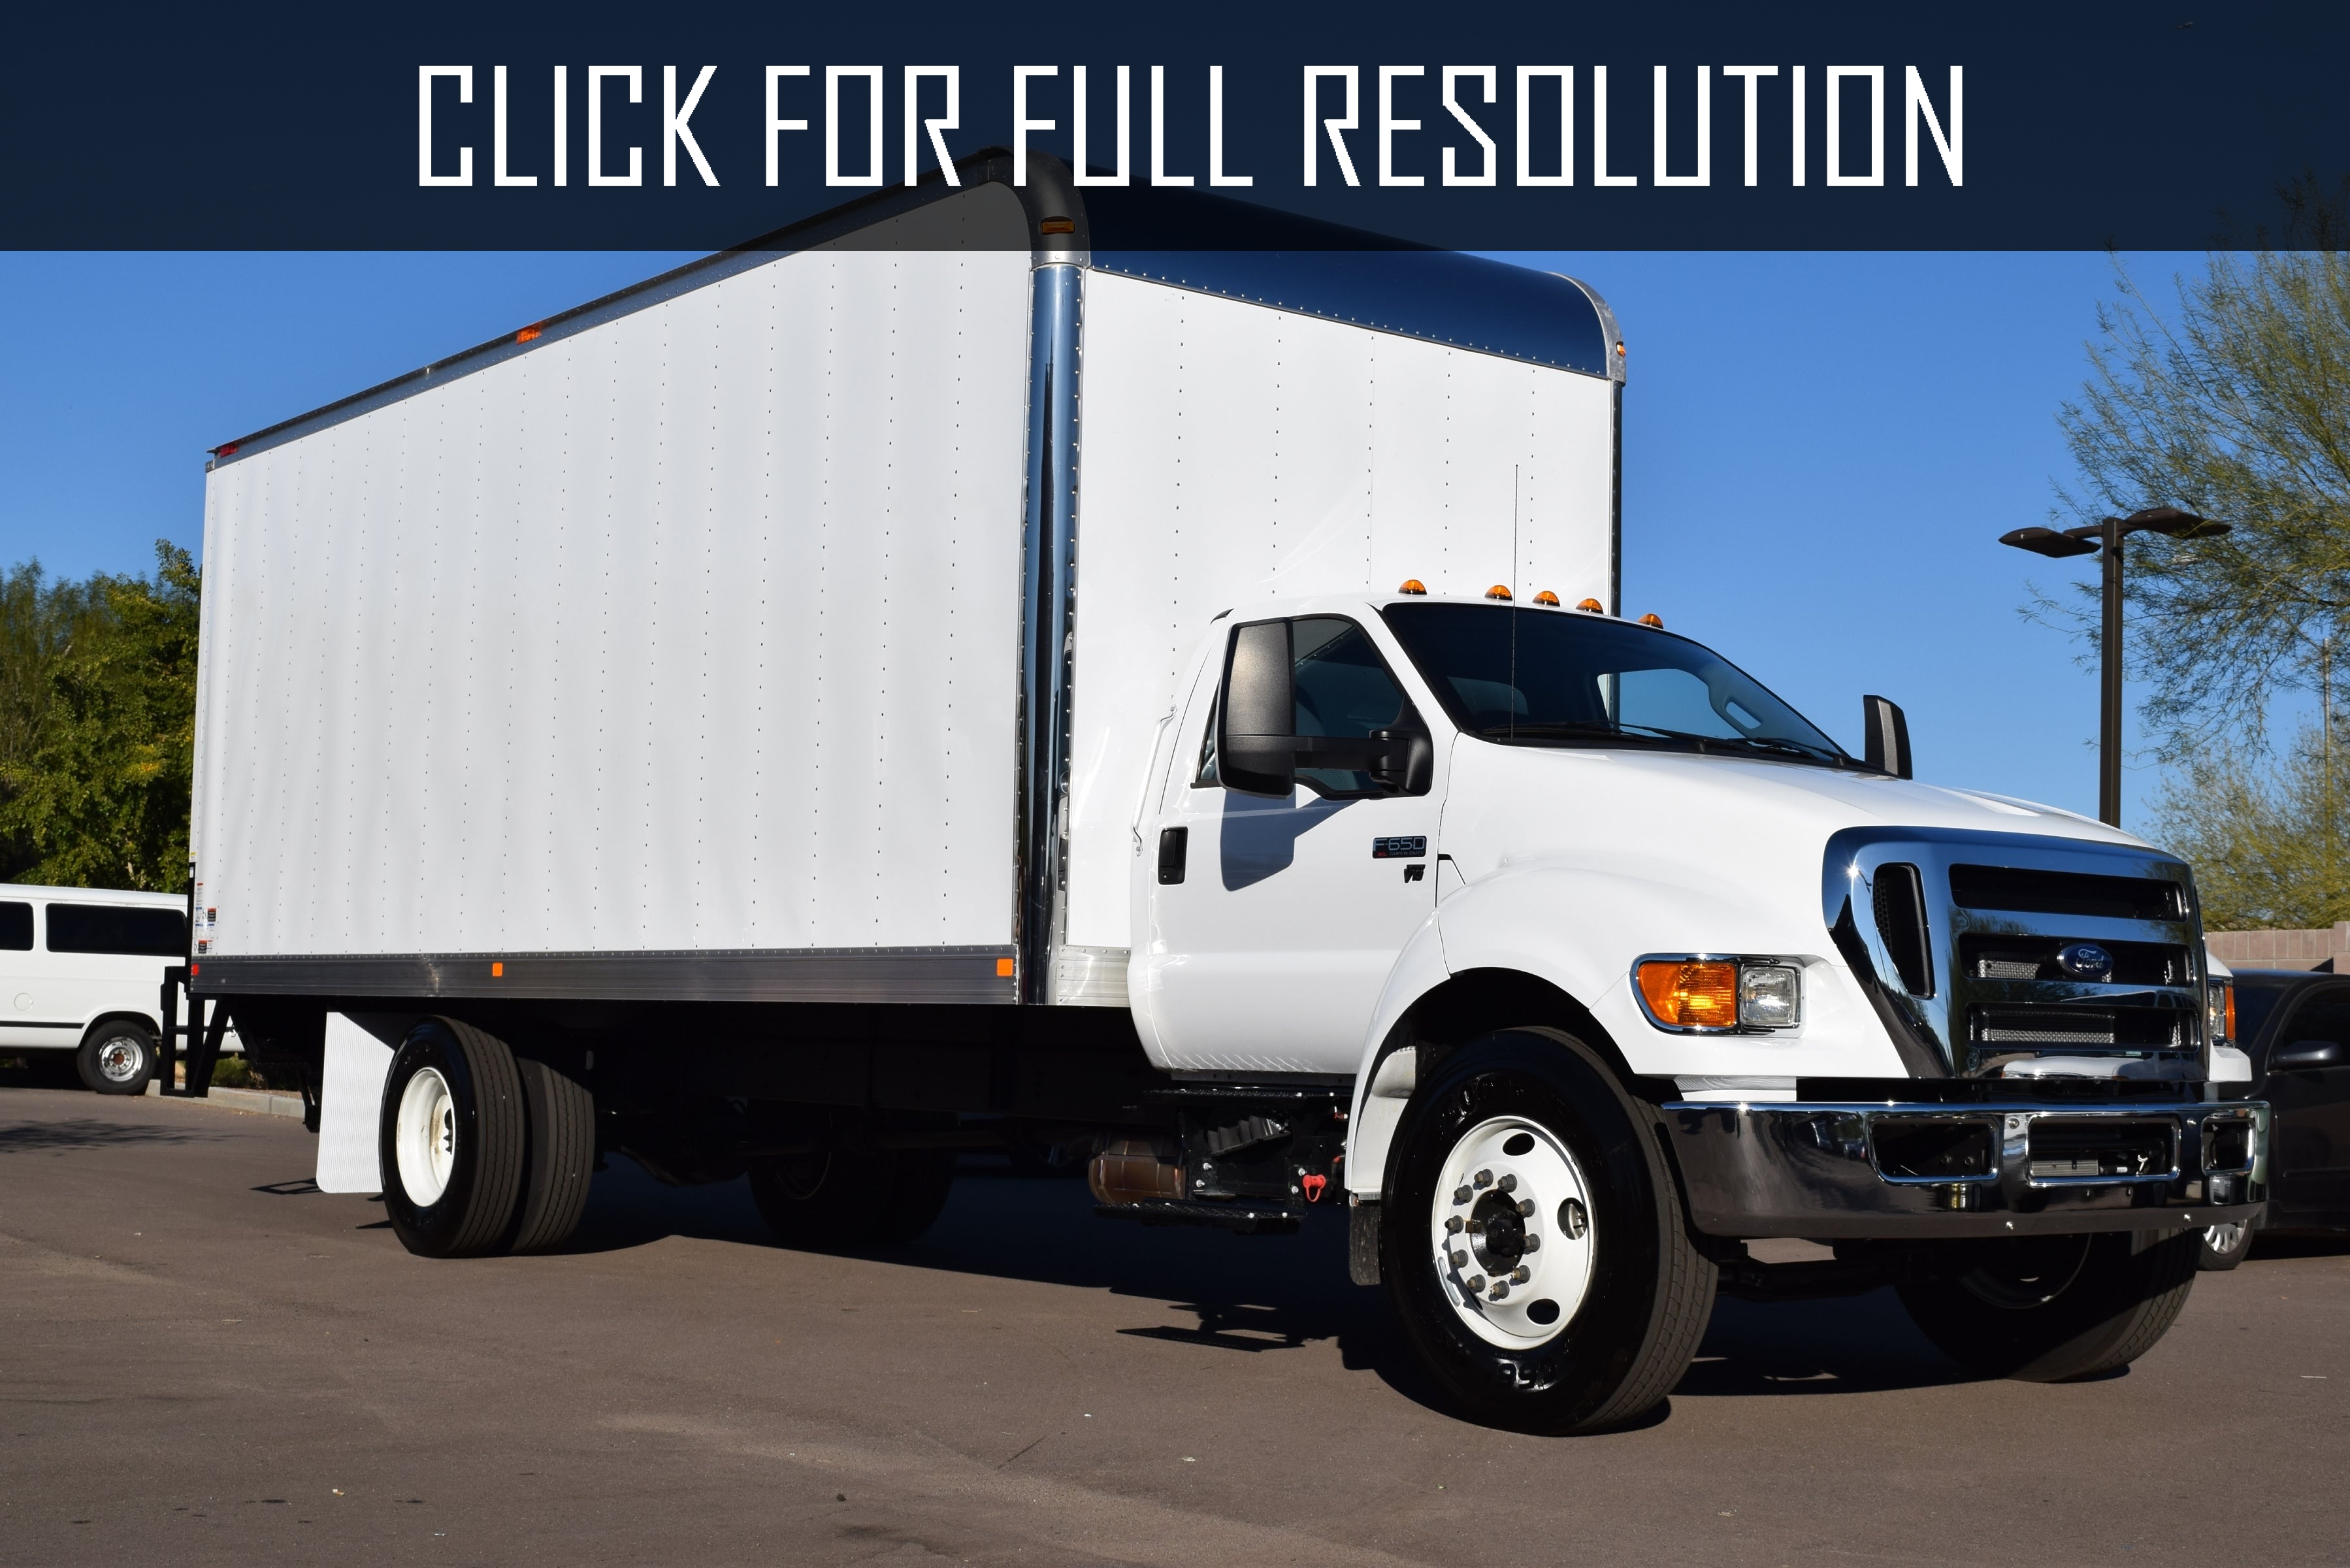 Ford F650 Box Truck Amazing Photo Gallery Some Information And